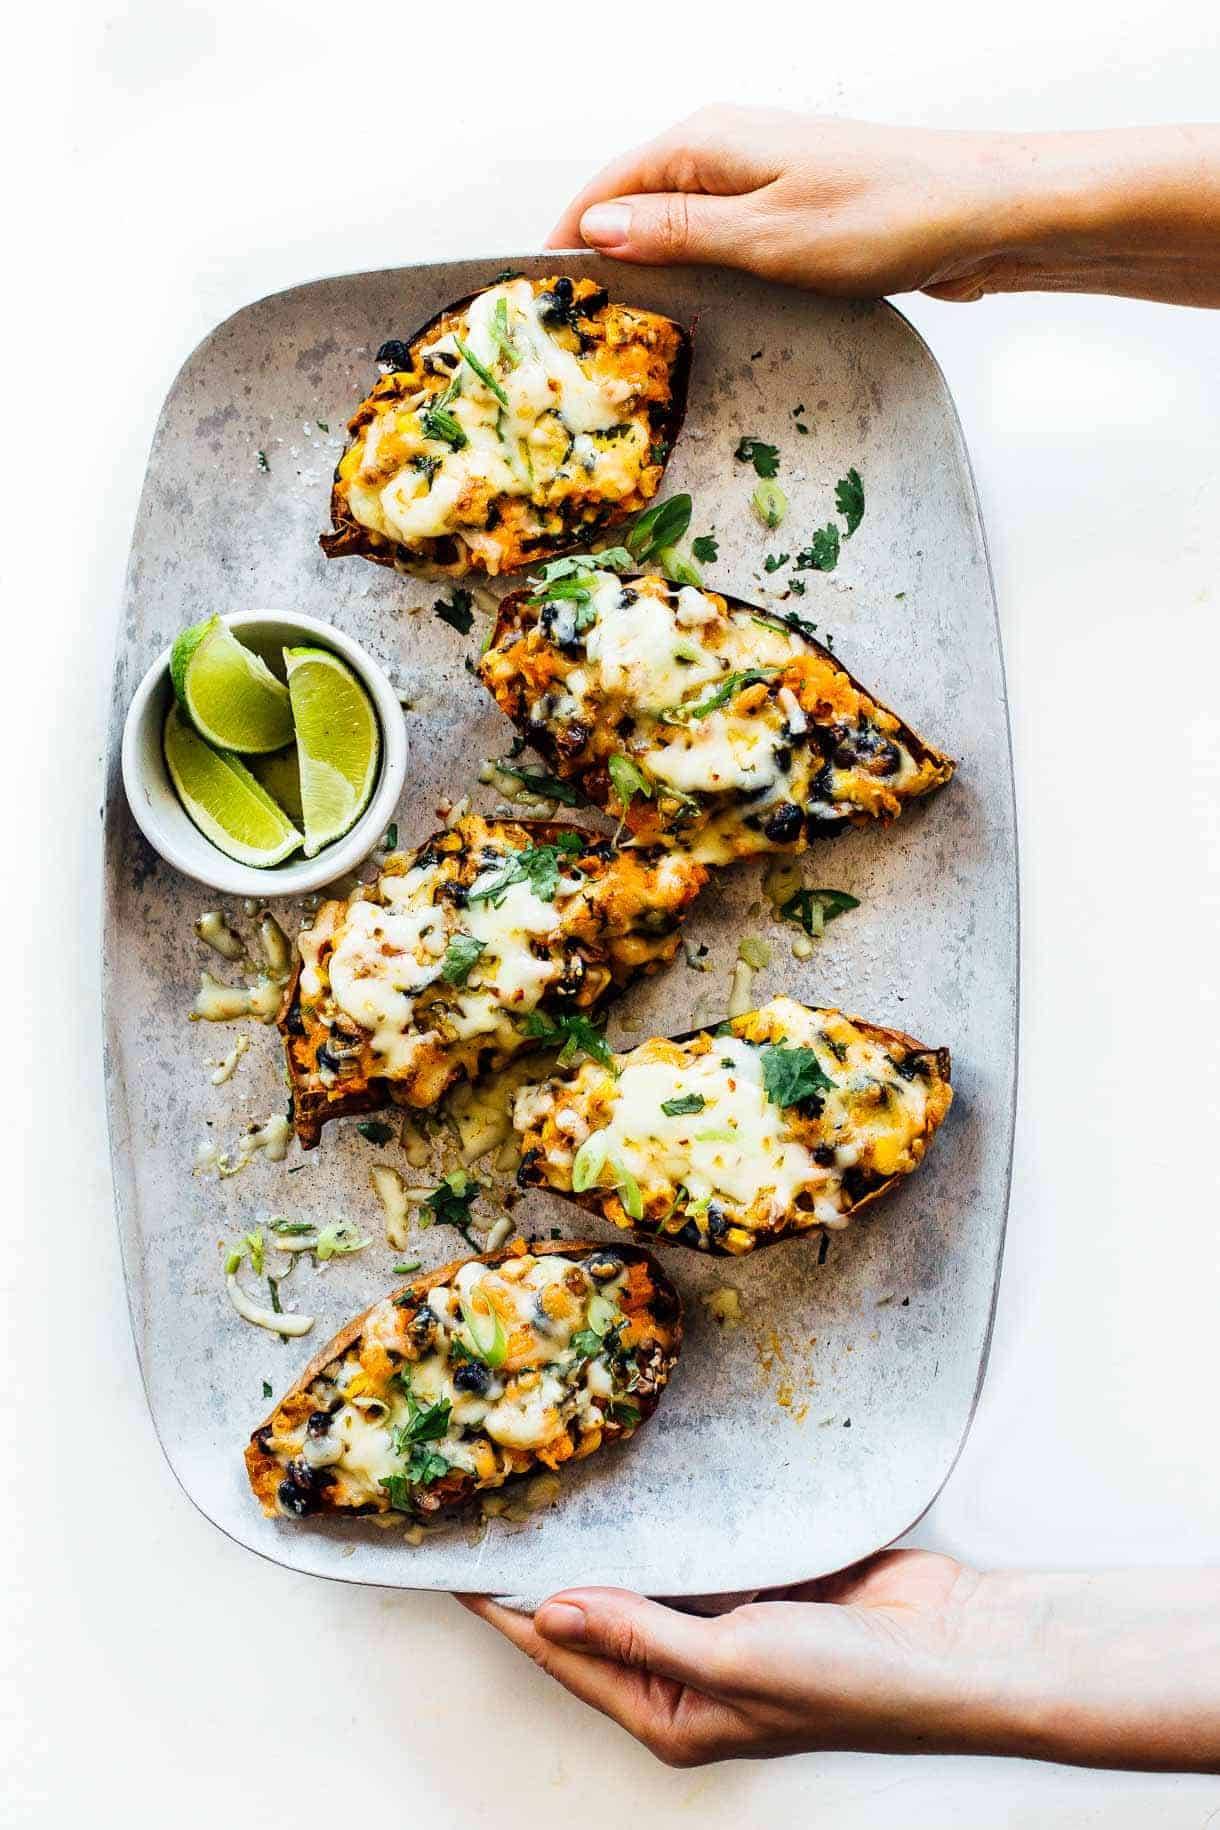 Mexican sweet potato skins on a plate with limes.